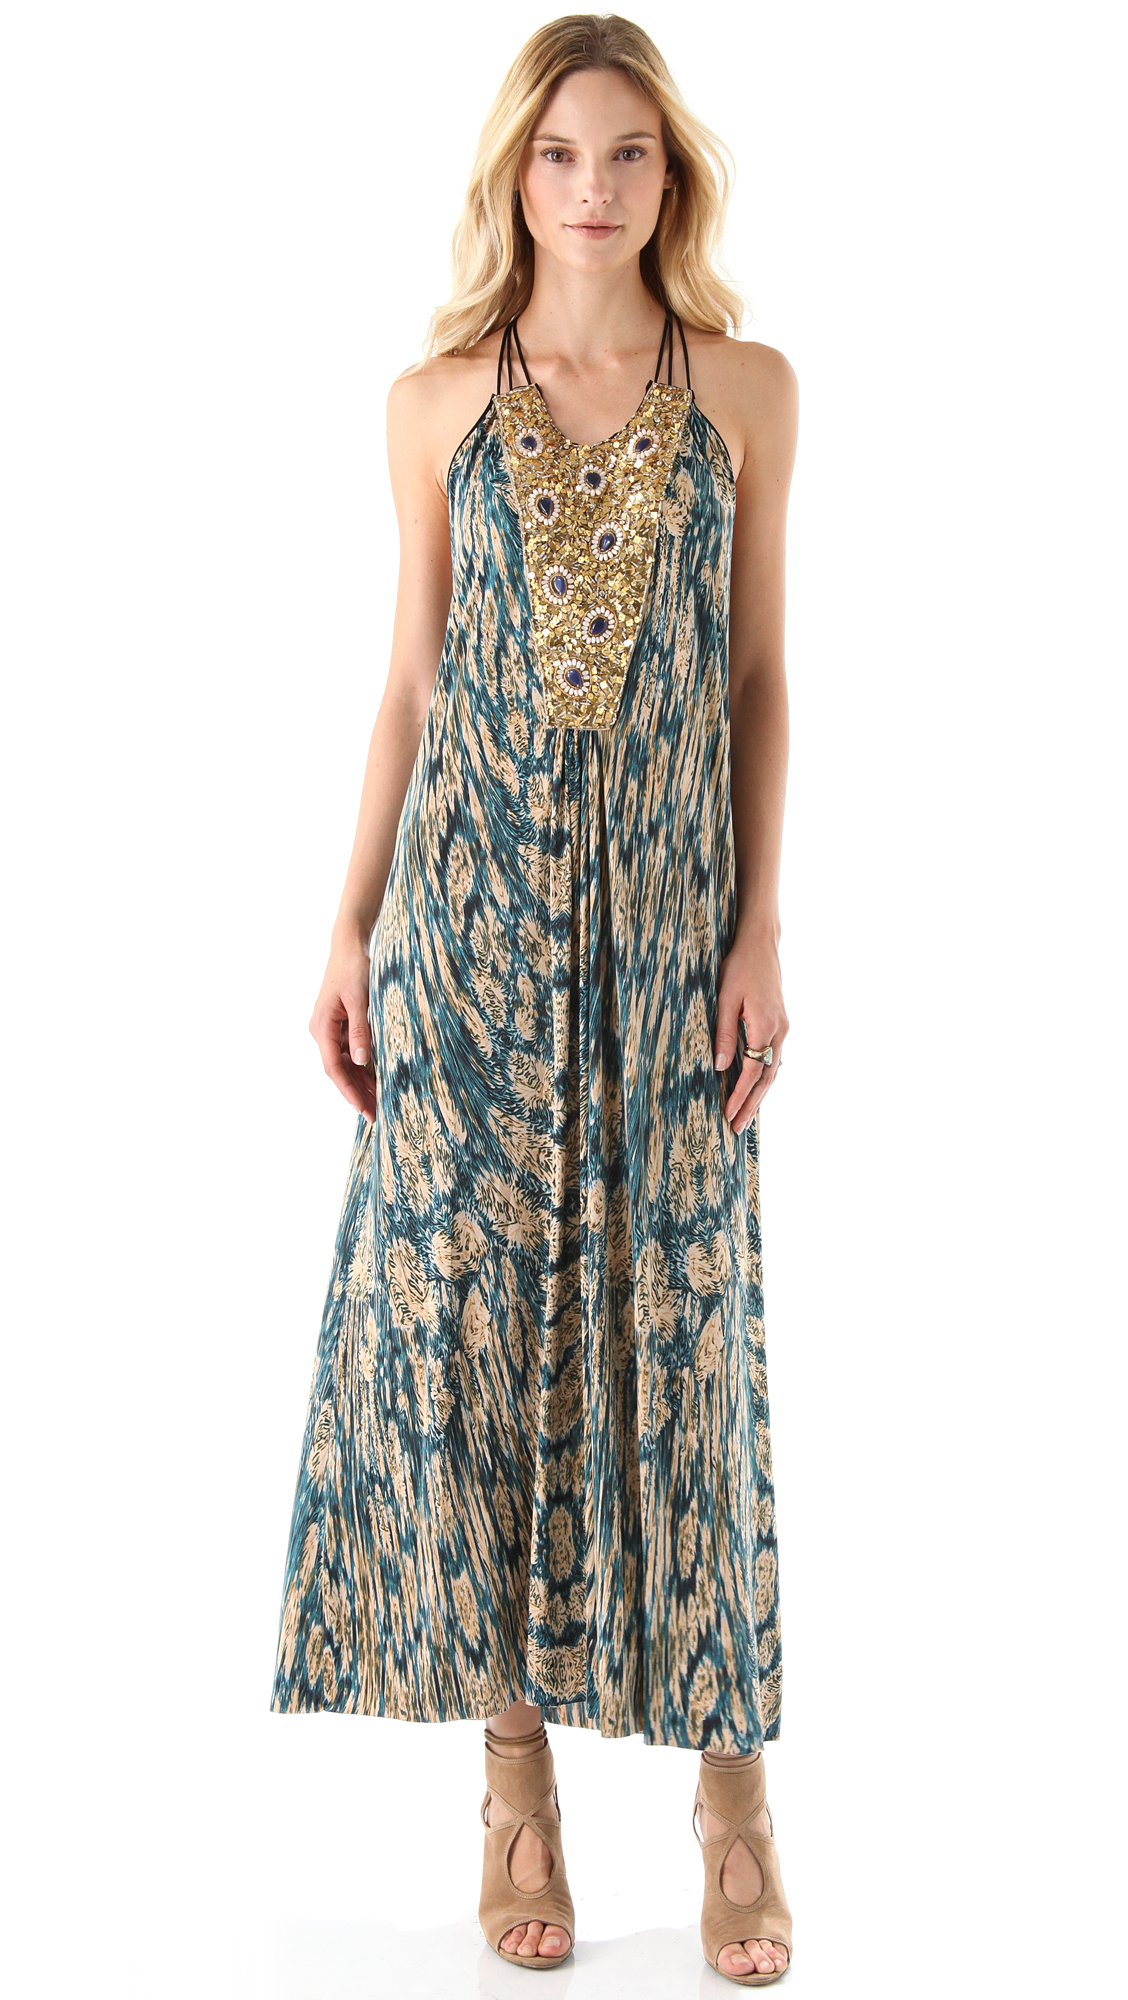 Lyst - T-Bags Maxi Dress with Beaded Bib in Blue